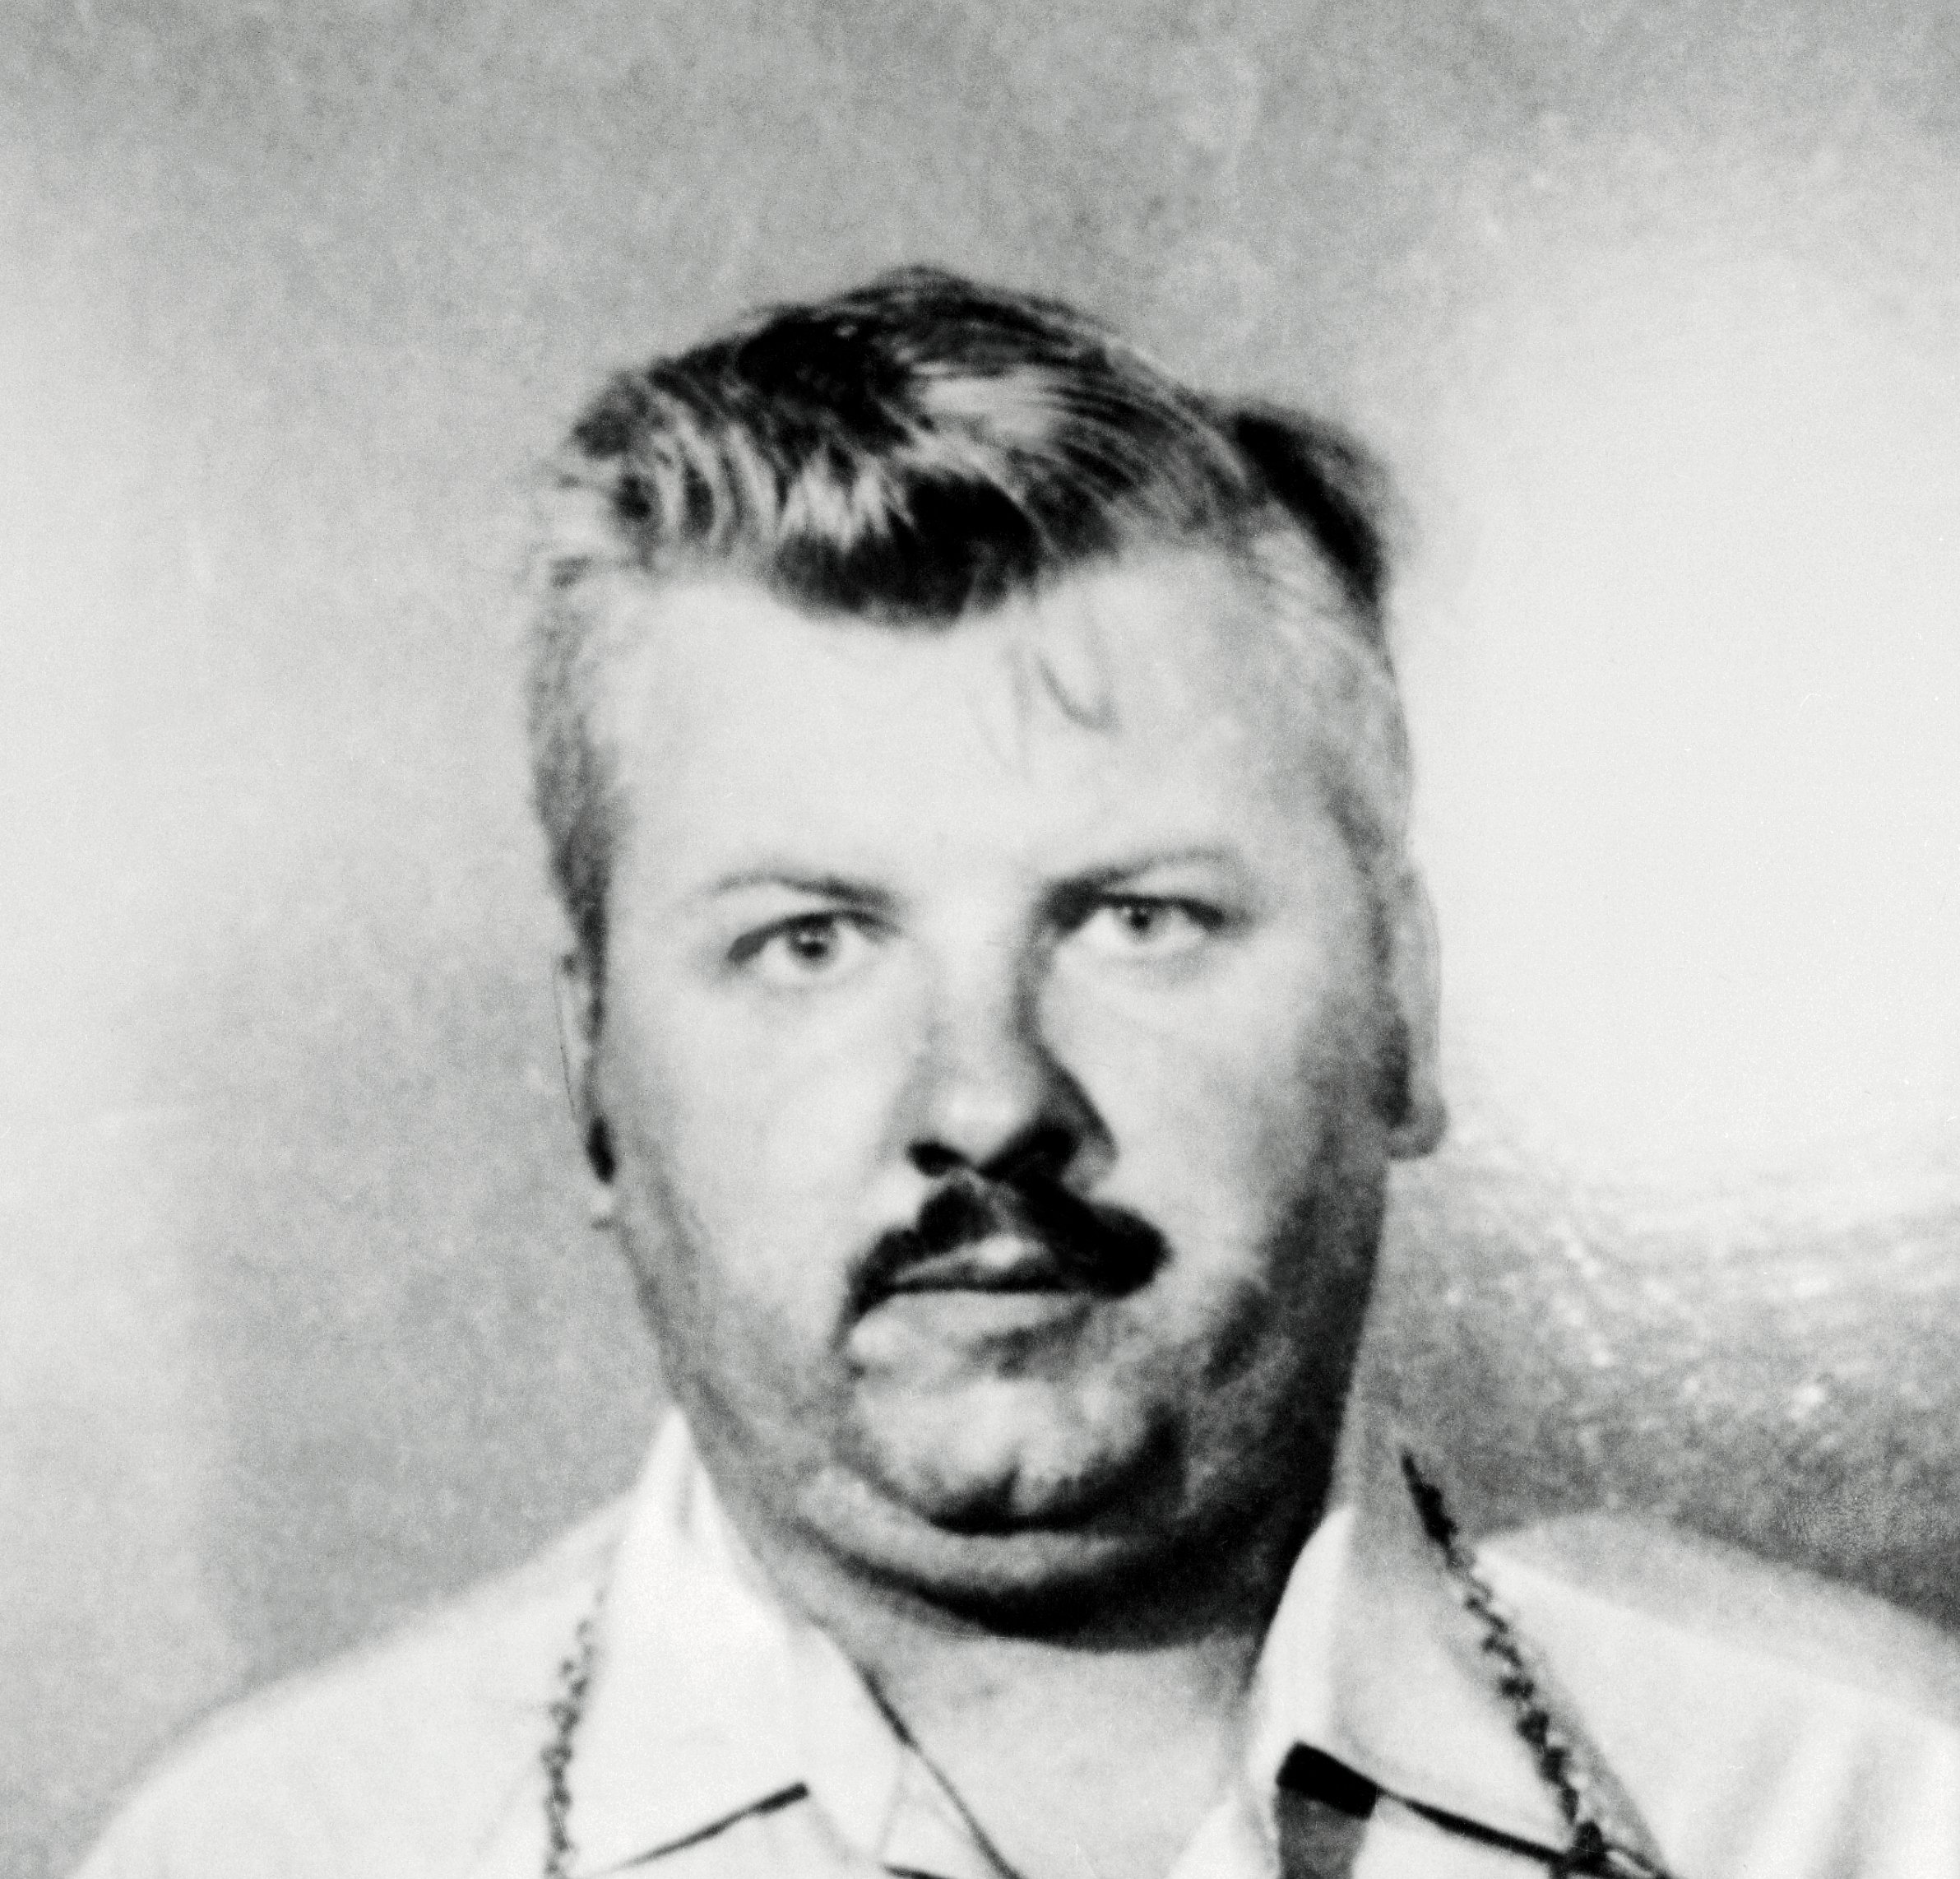 A picture of John Wayne Gacy from December 22, 1978 | Source: Getty Images